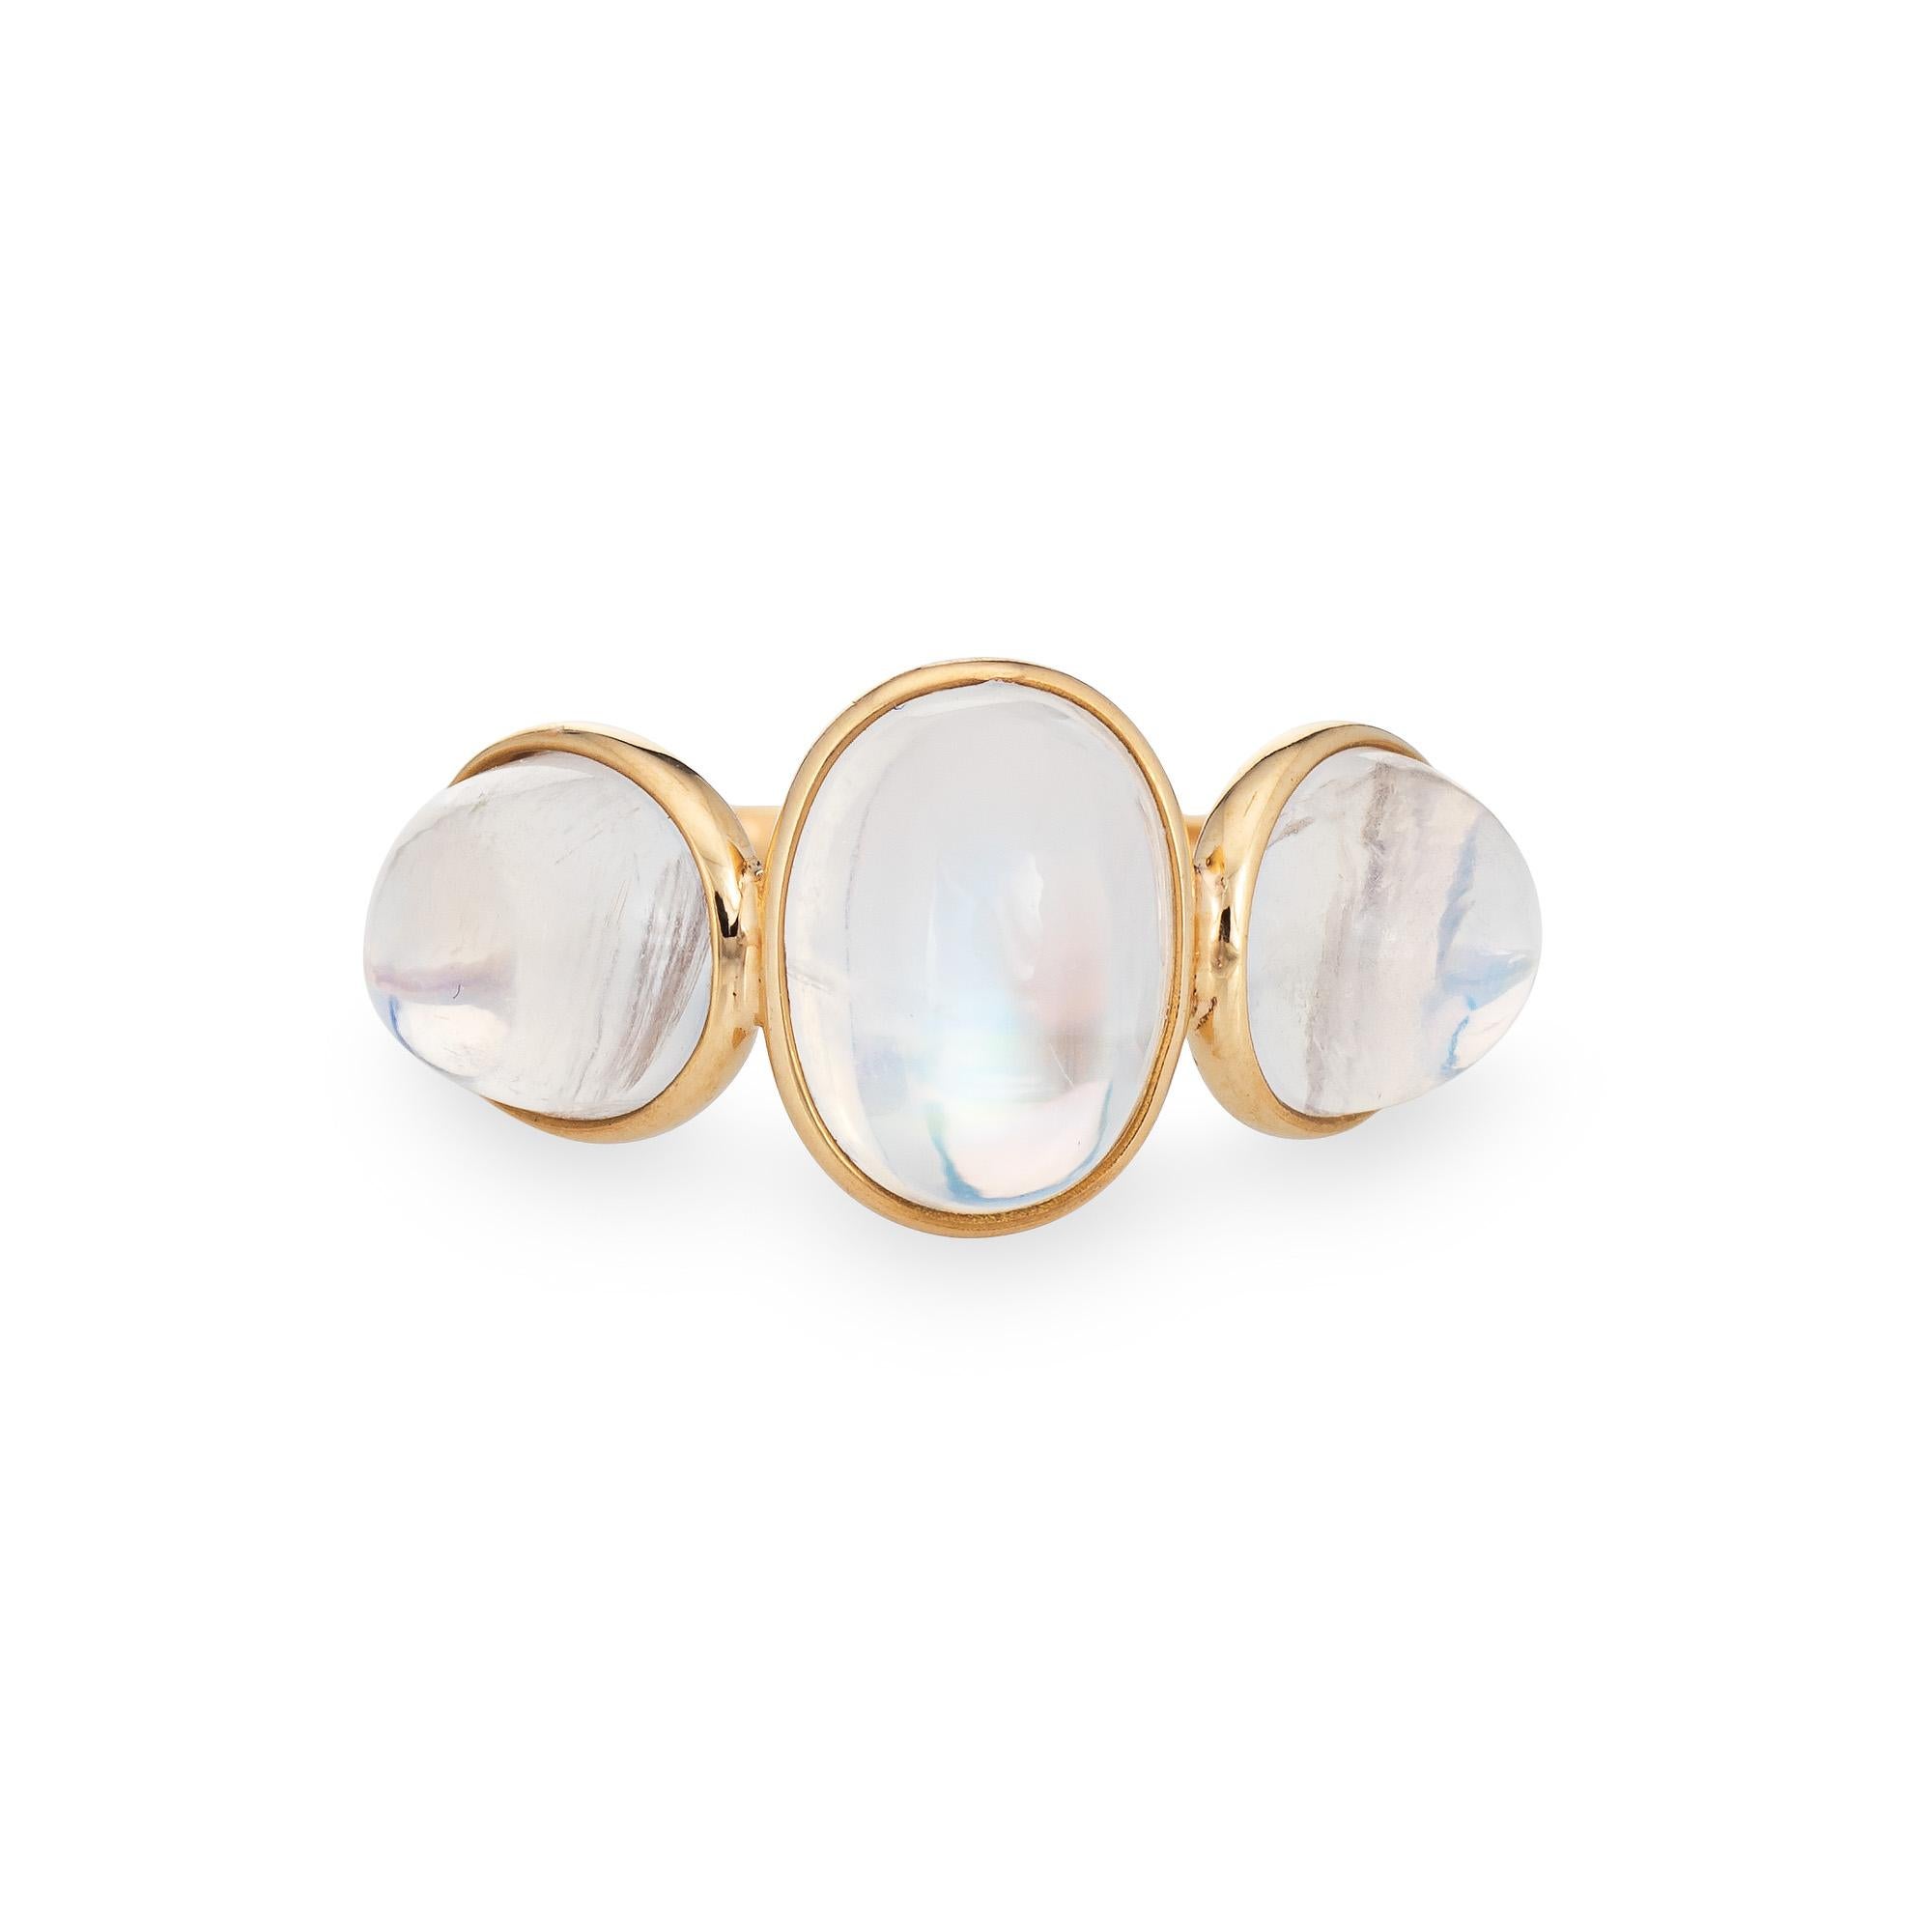 Stylish contemporary three stone rainbow moonstone ring crafted in 18 karat yellow gold. 

Cabochon cut moonstones total an estimated 7.76 carats. The moonstones are in good condition and free of cracks or chips.  

Three high dome cabochon cut